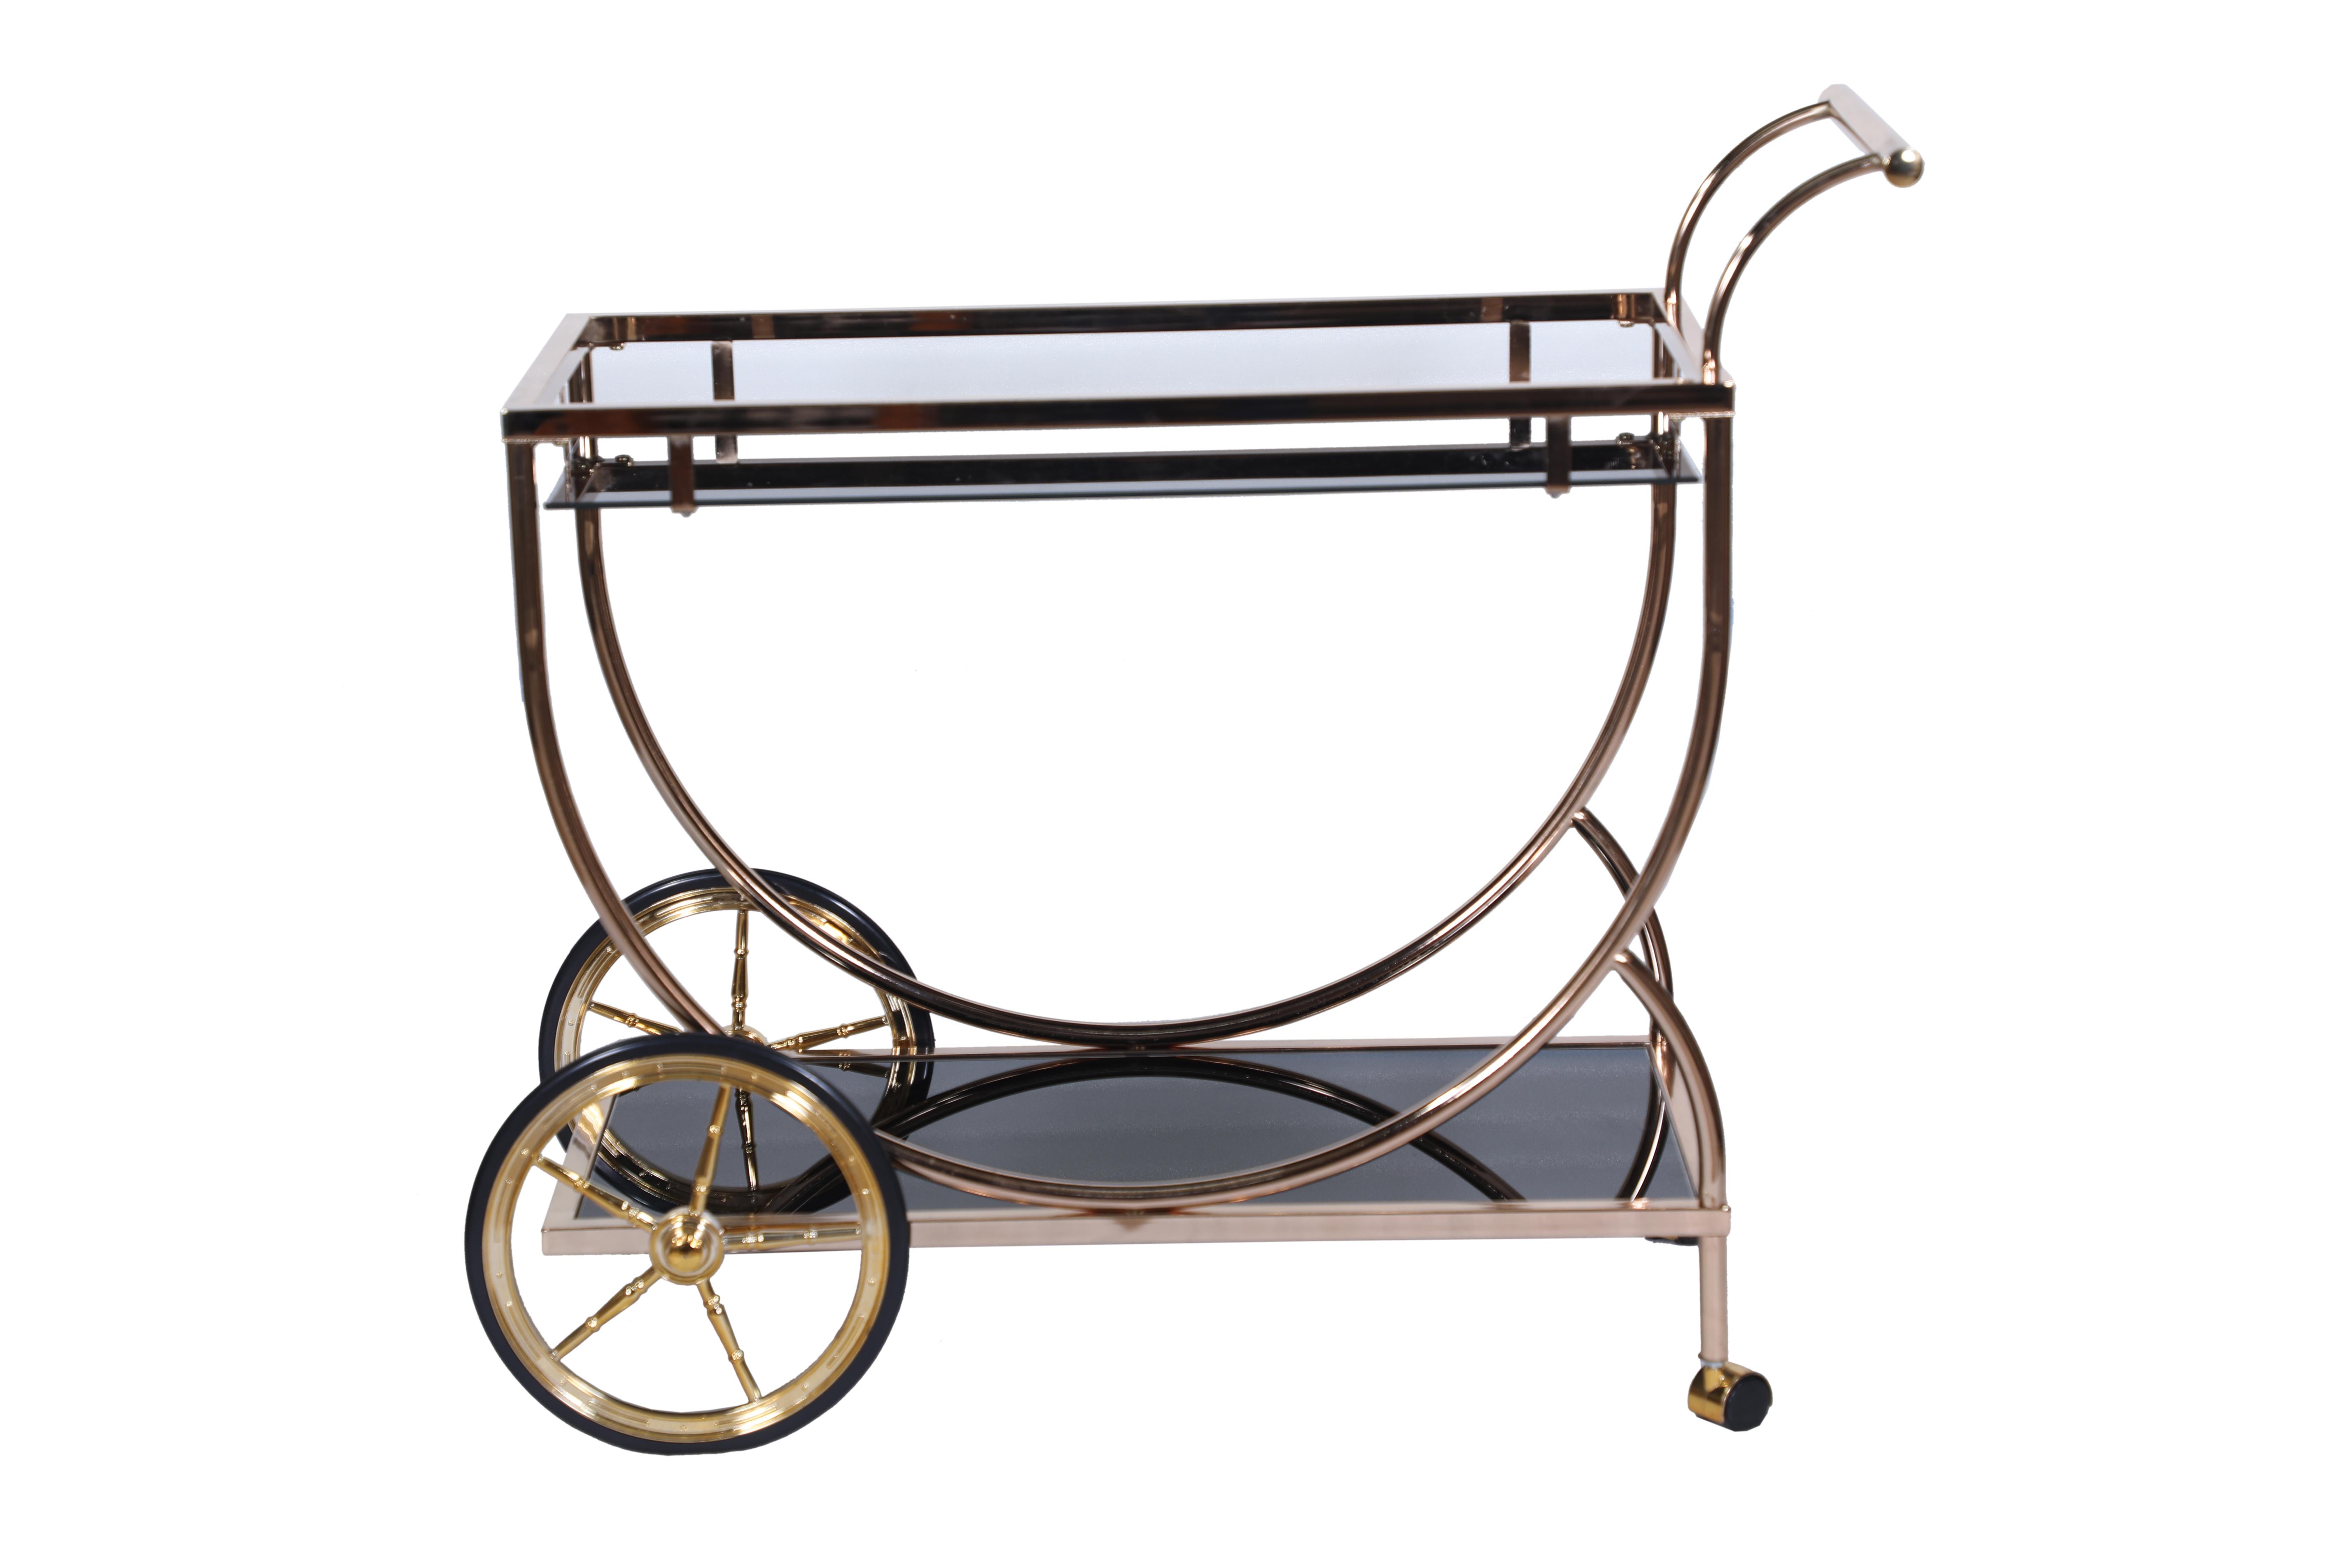 A brushed brass trolley or bar cart with glass shelves.  Handle on once side, larger wheels on the other and swivel wheels on the handle side.  1980's.

The Lockhart Collection is a personally curated gallery of antiques and fine jewelry, owned and